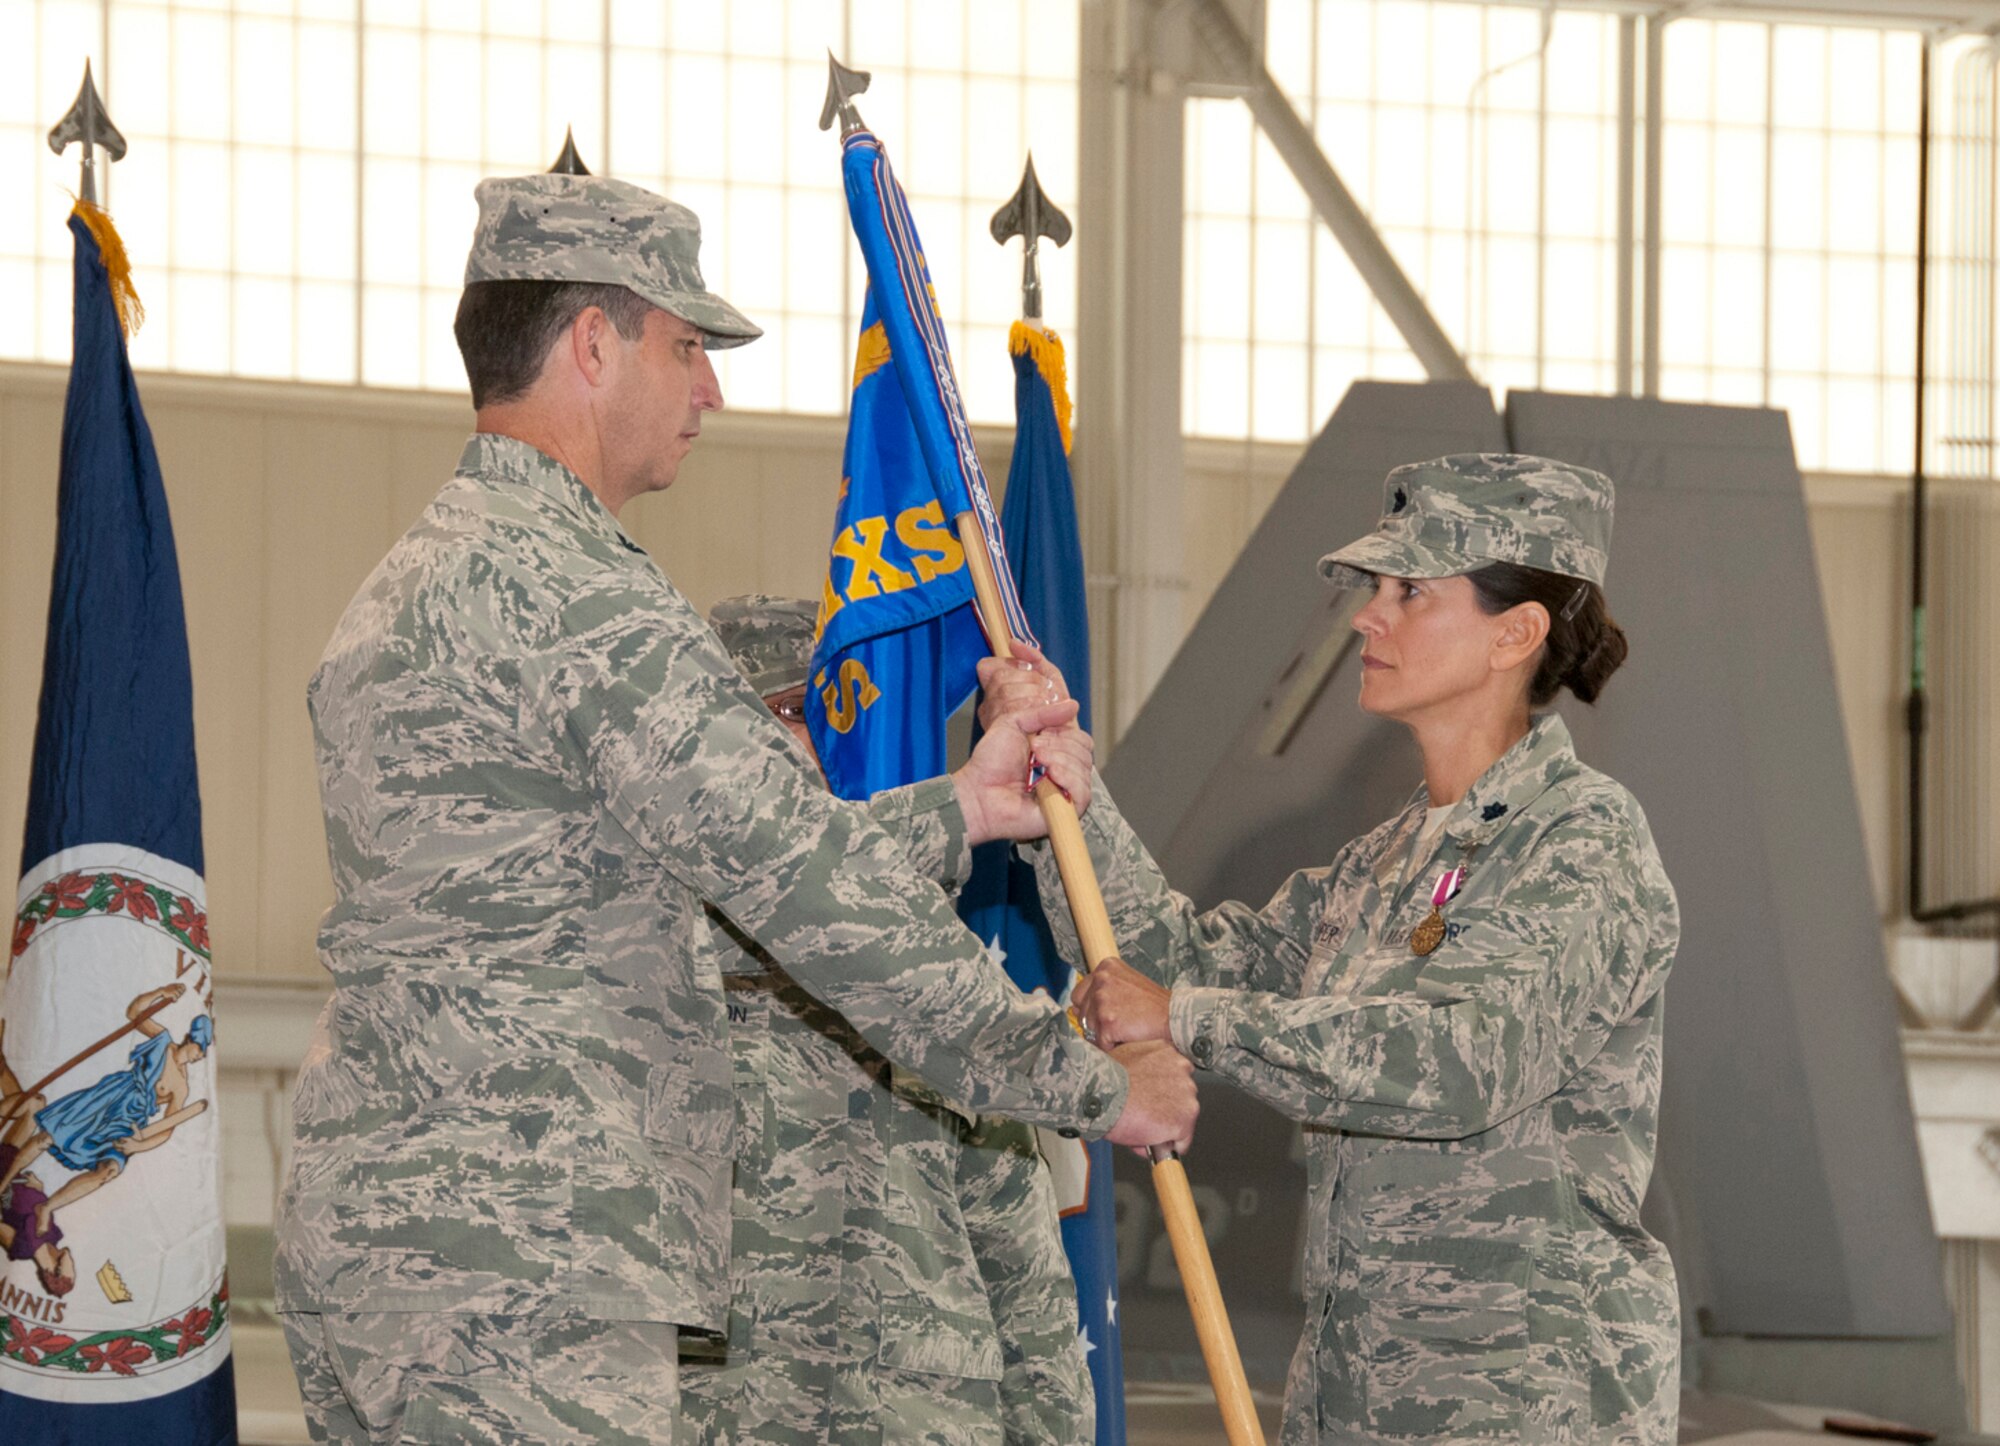 Lt. Col. Catherine M. Jumper assumed command of the 192nd Fighter Wing Aircraft Maintenance Squadron during a ceremony held October 18, 2015, at Joint Base Langley-Eustis, Virginia. 